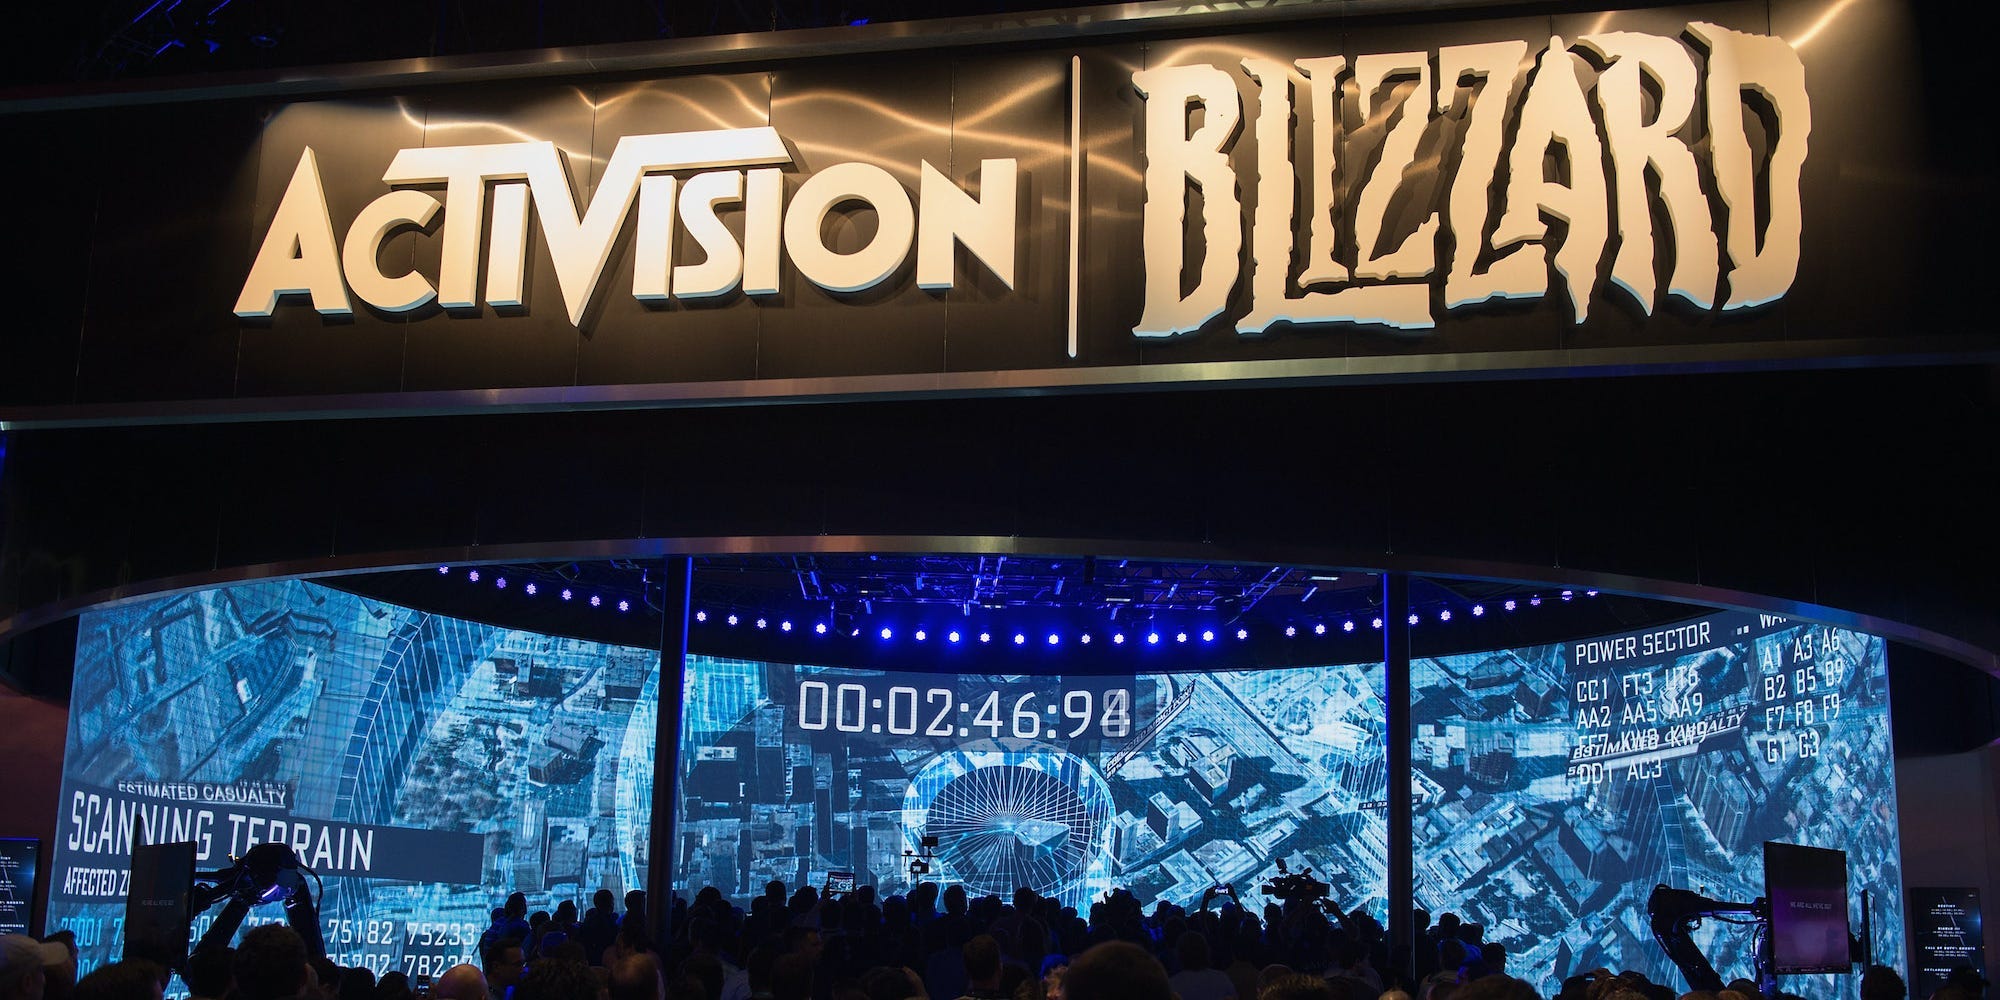 Blizzard activision booth at E3